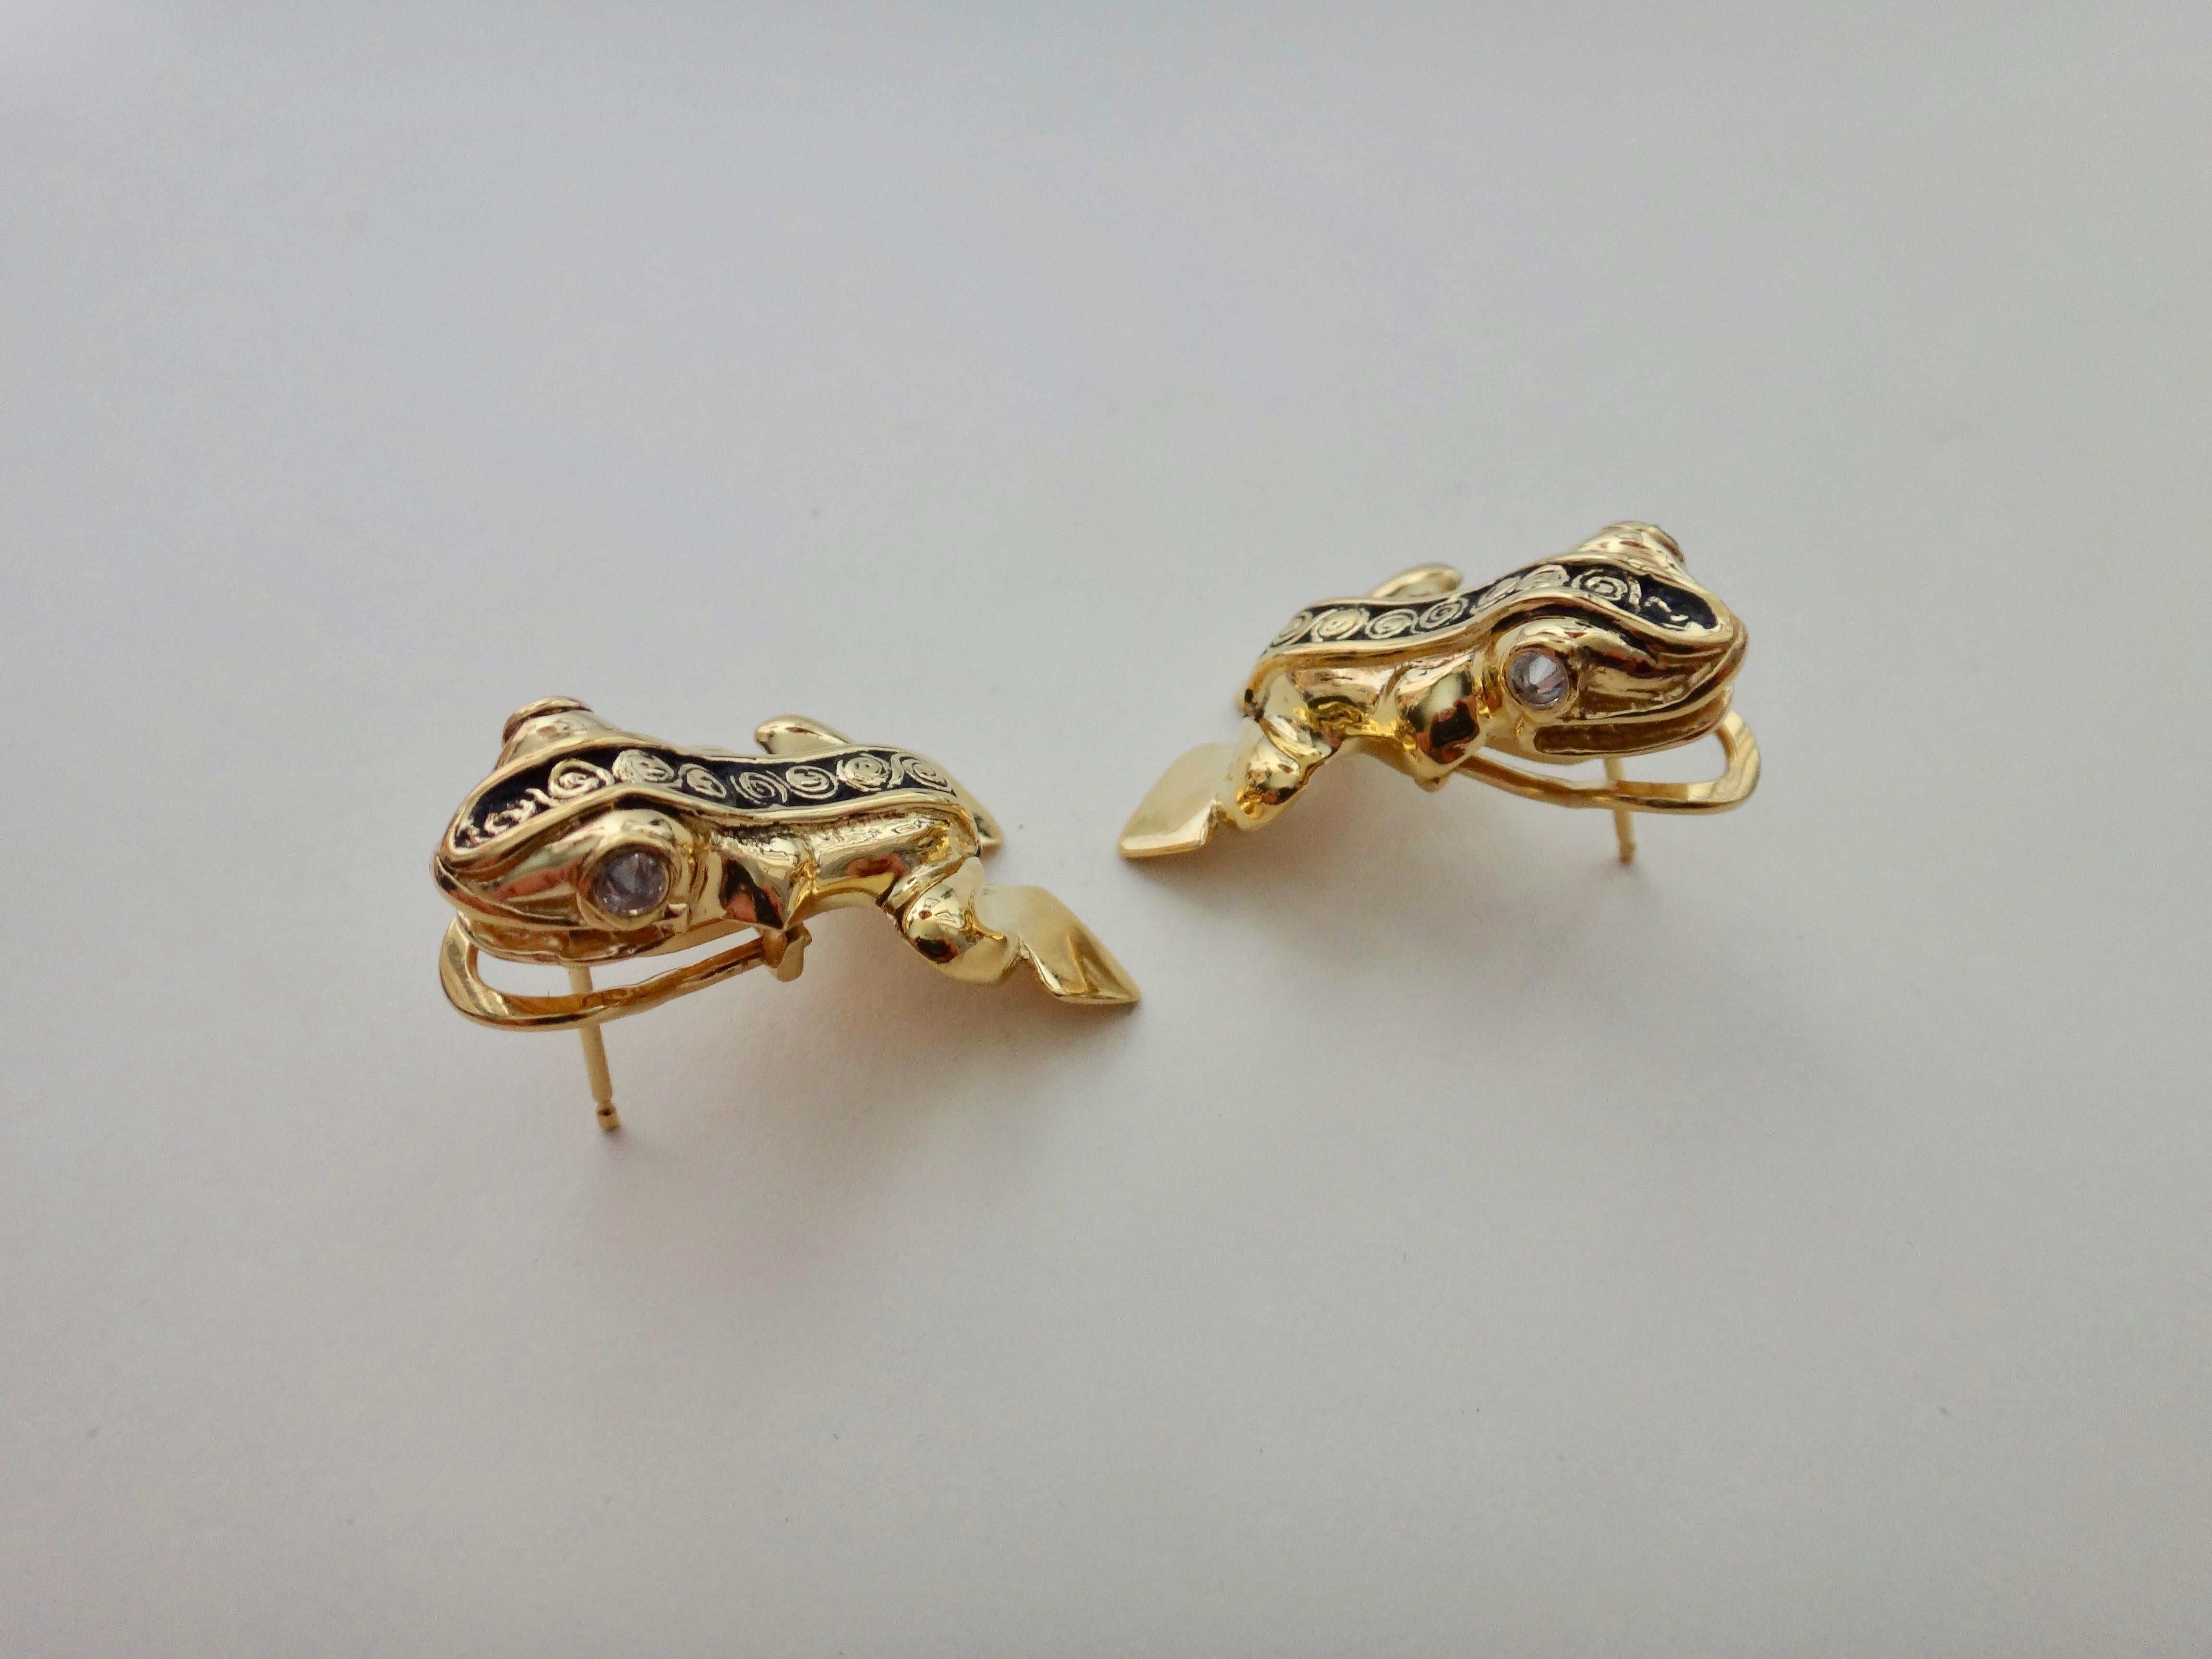 The Inca Frog Earrings are a playful pair of 18k yellow gold frogs inspired by Inca imagery.  Throughout history including the Incan culture, the much love frog is a symbol of fertility and renewal.  These frogs come alive with reverse set diamond